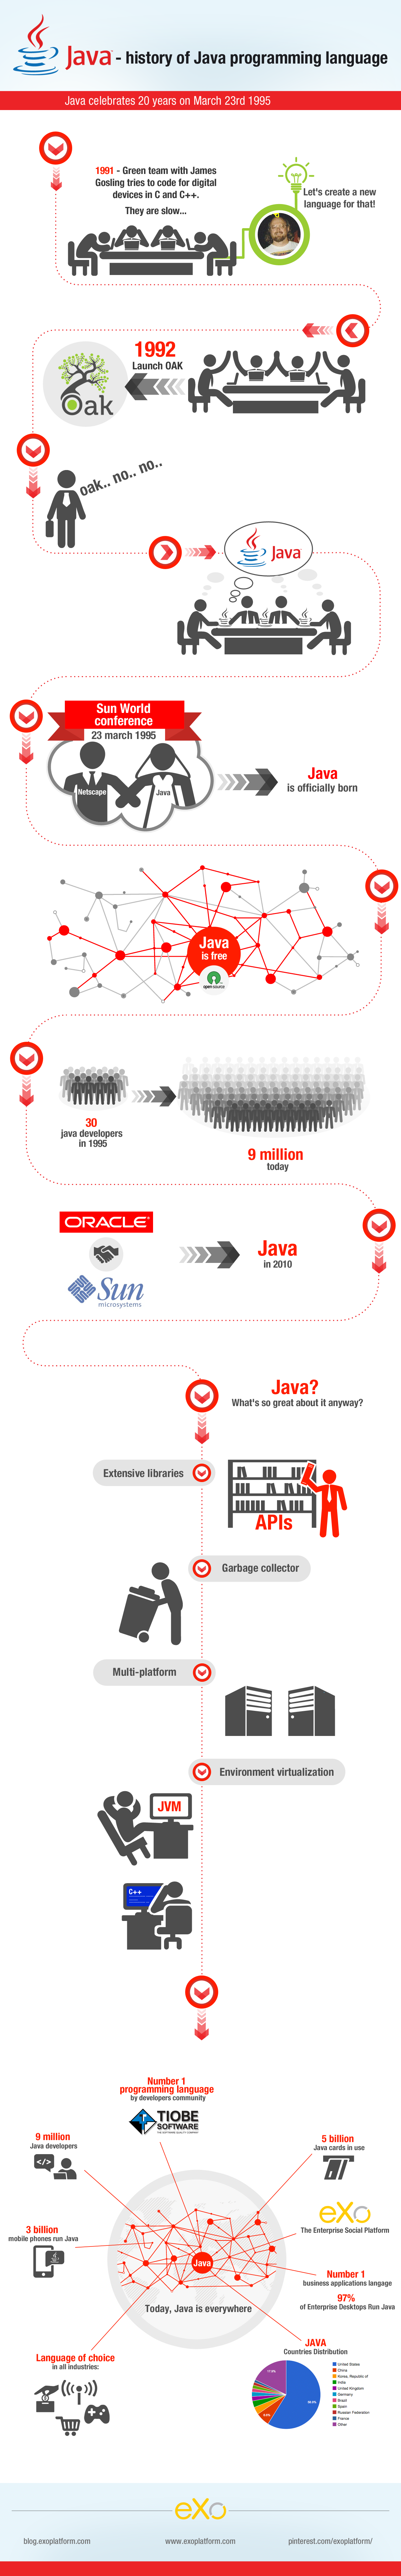 Infographic – eXo Wishes a Happy 20th Birthday to Java